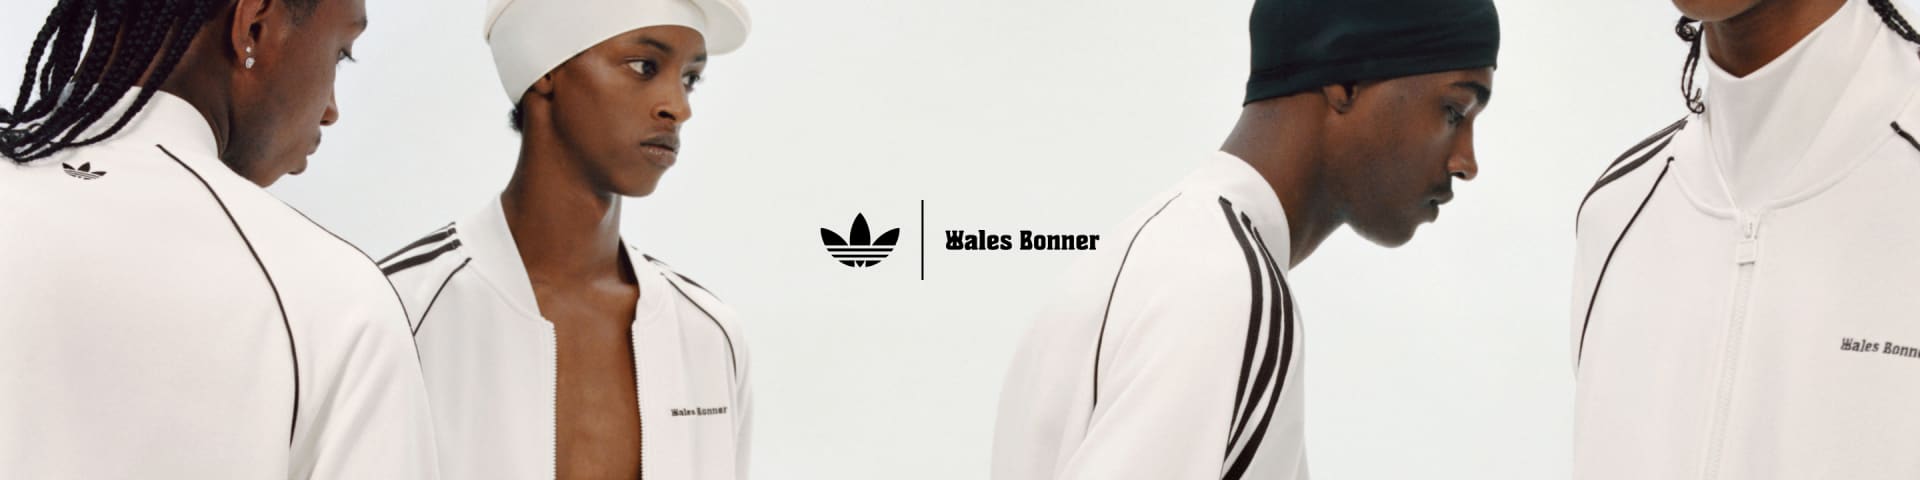 Four models are posing against a white background, all wearing white outfits from the adidas Originals by Wales Bonner collection.